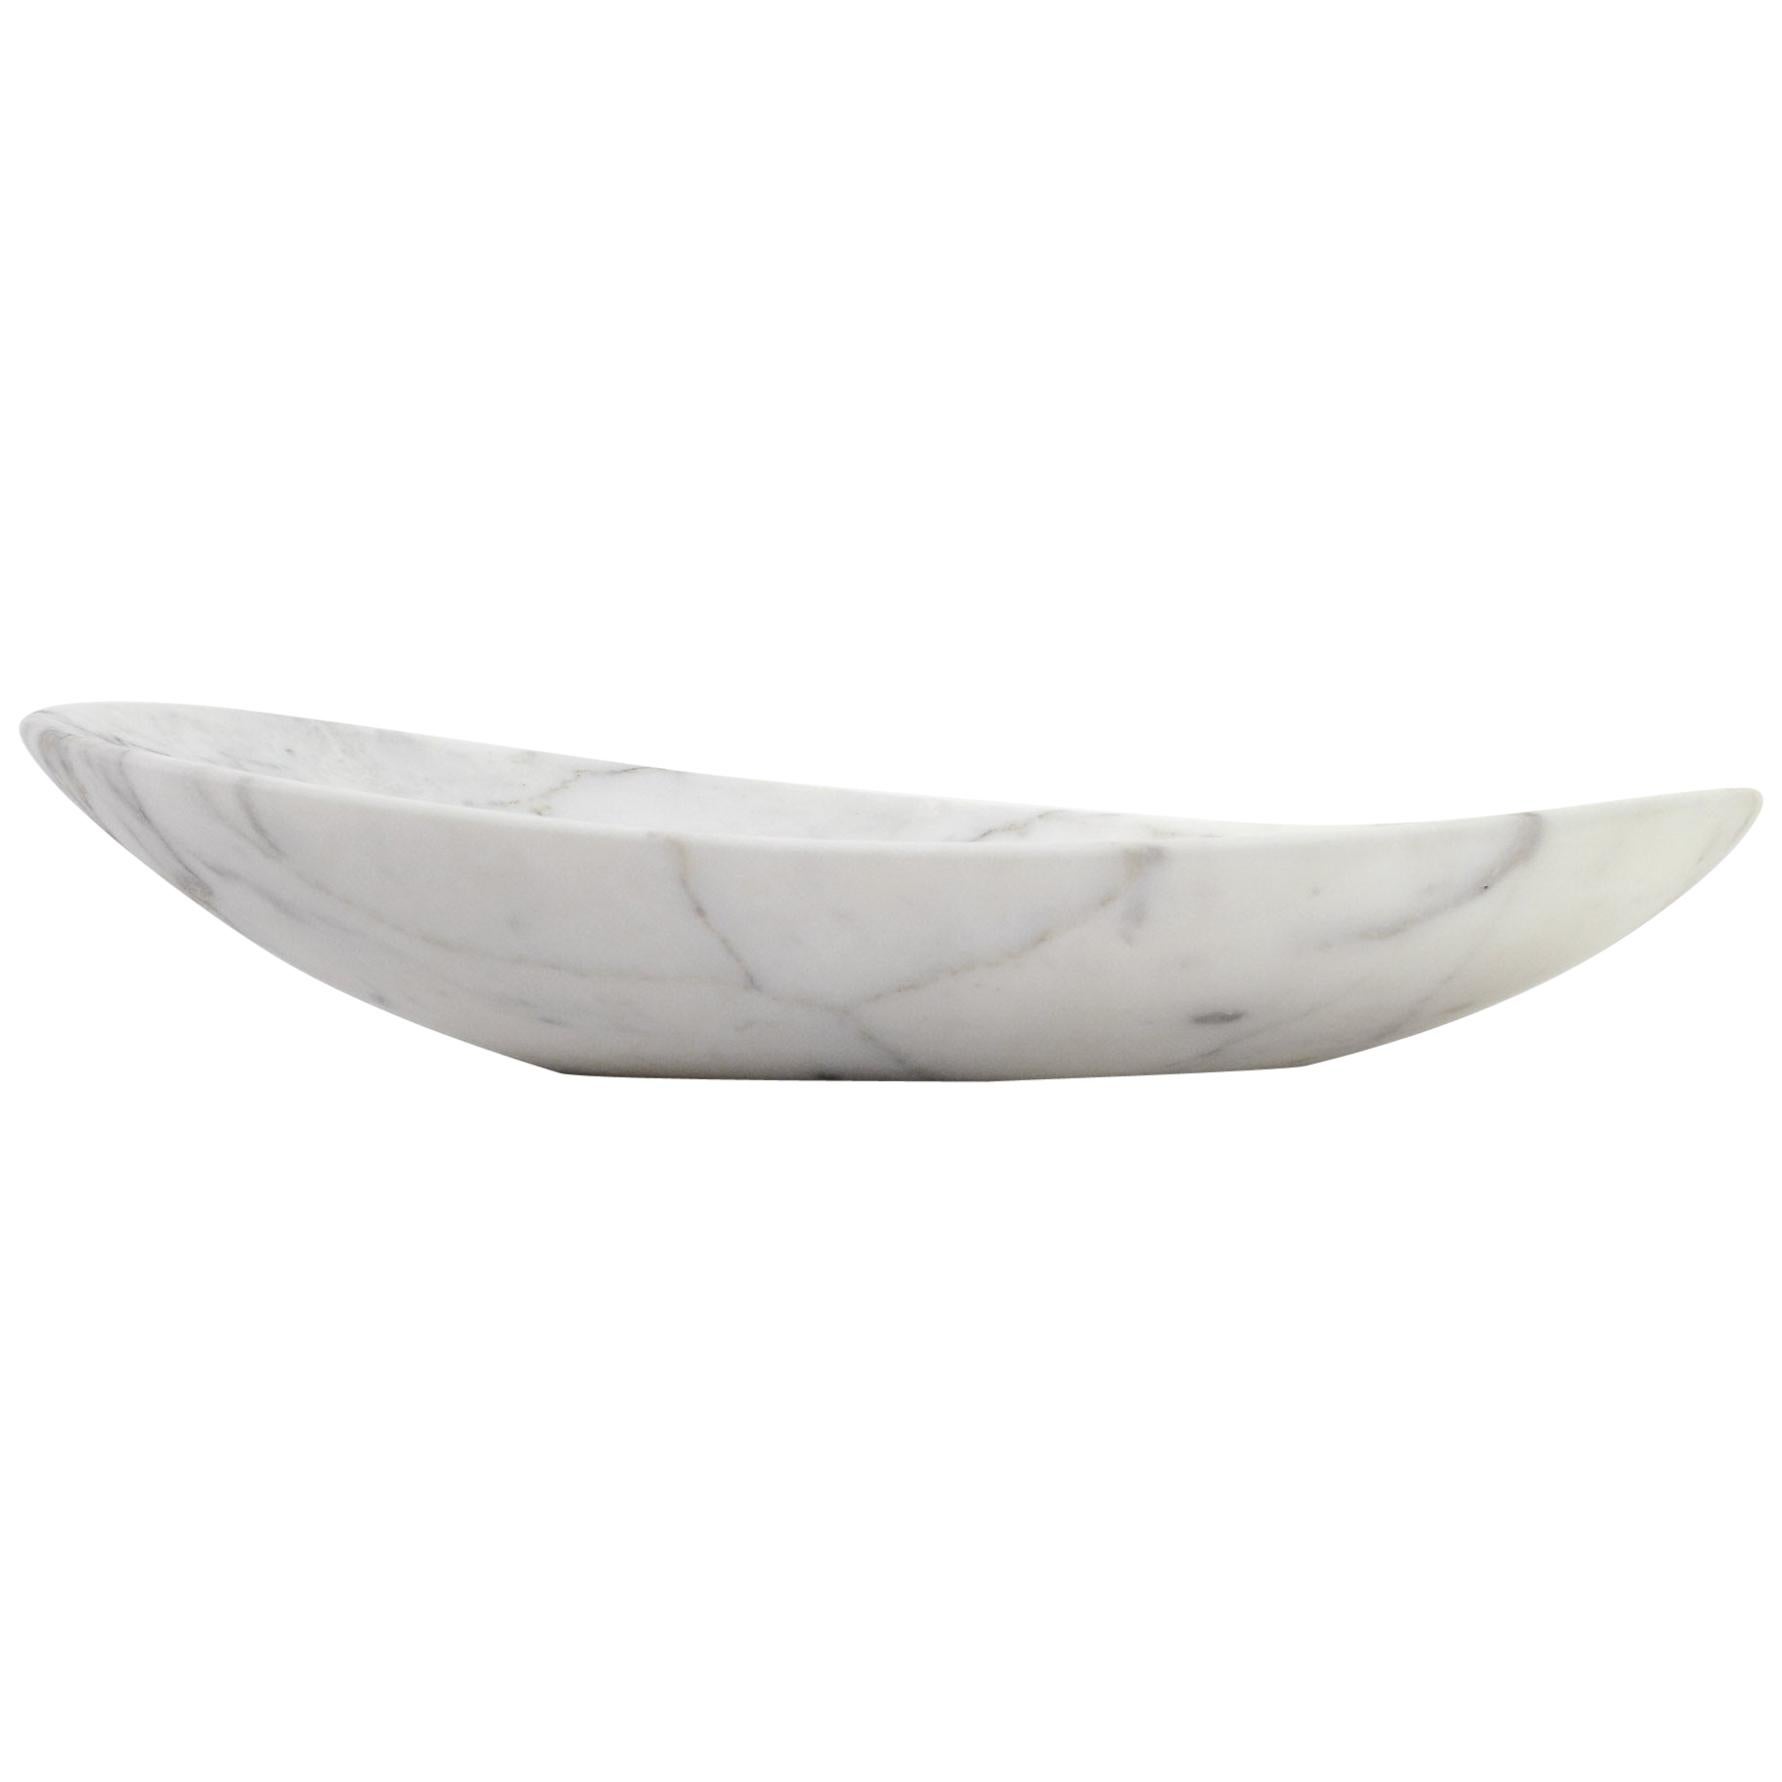 Bowl Vase Centerpiece Serveware Block White Calacatta Marble Hand-carved Italy For Sale